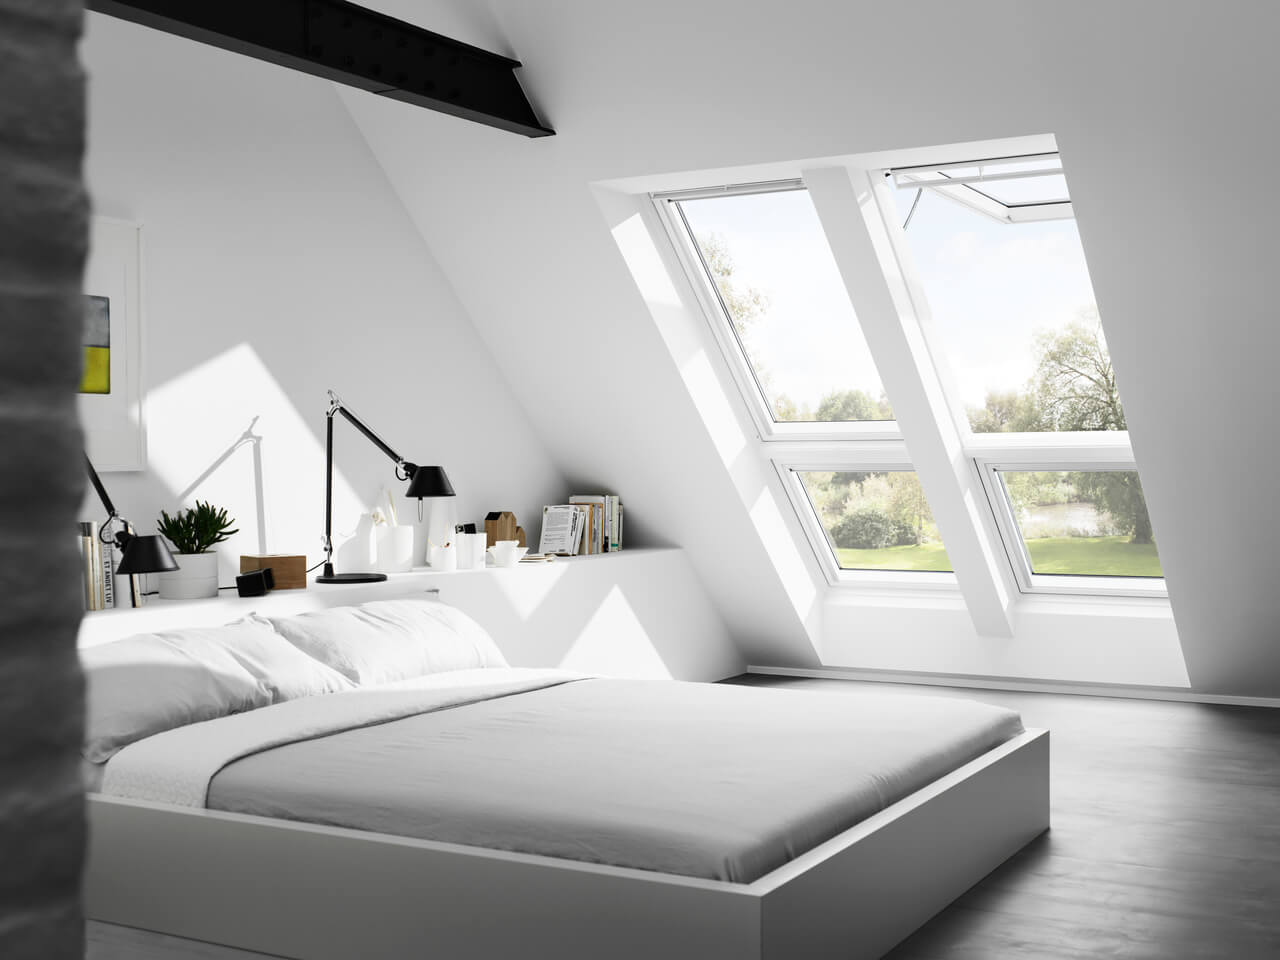 Bright white painted bedroom with two roof windows